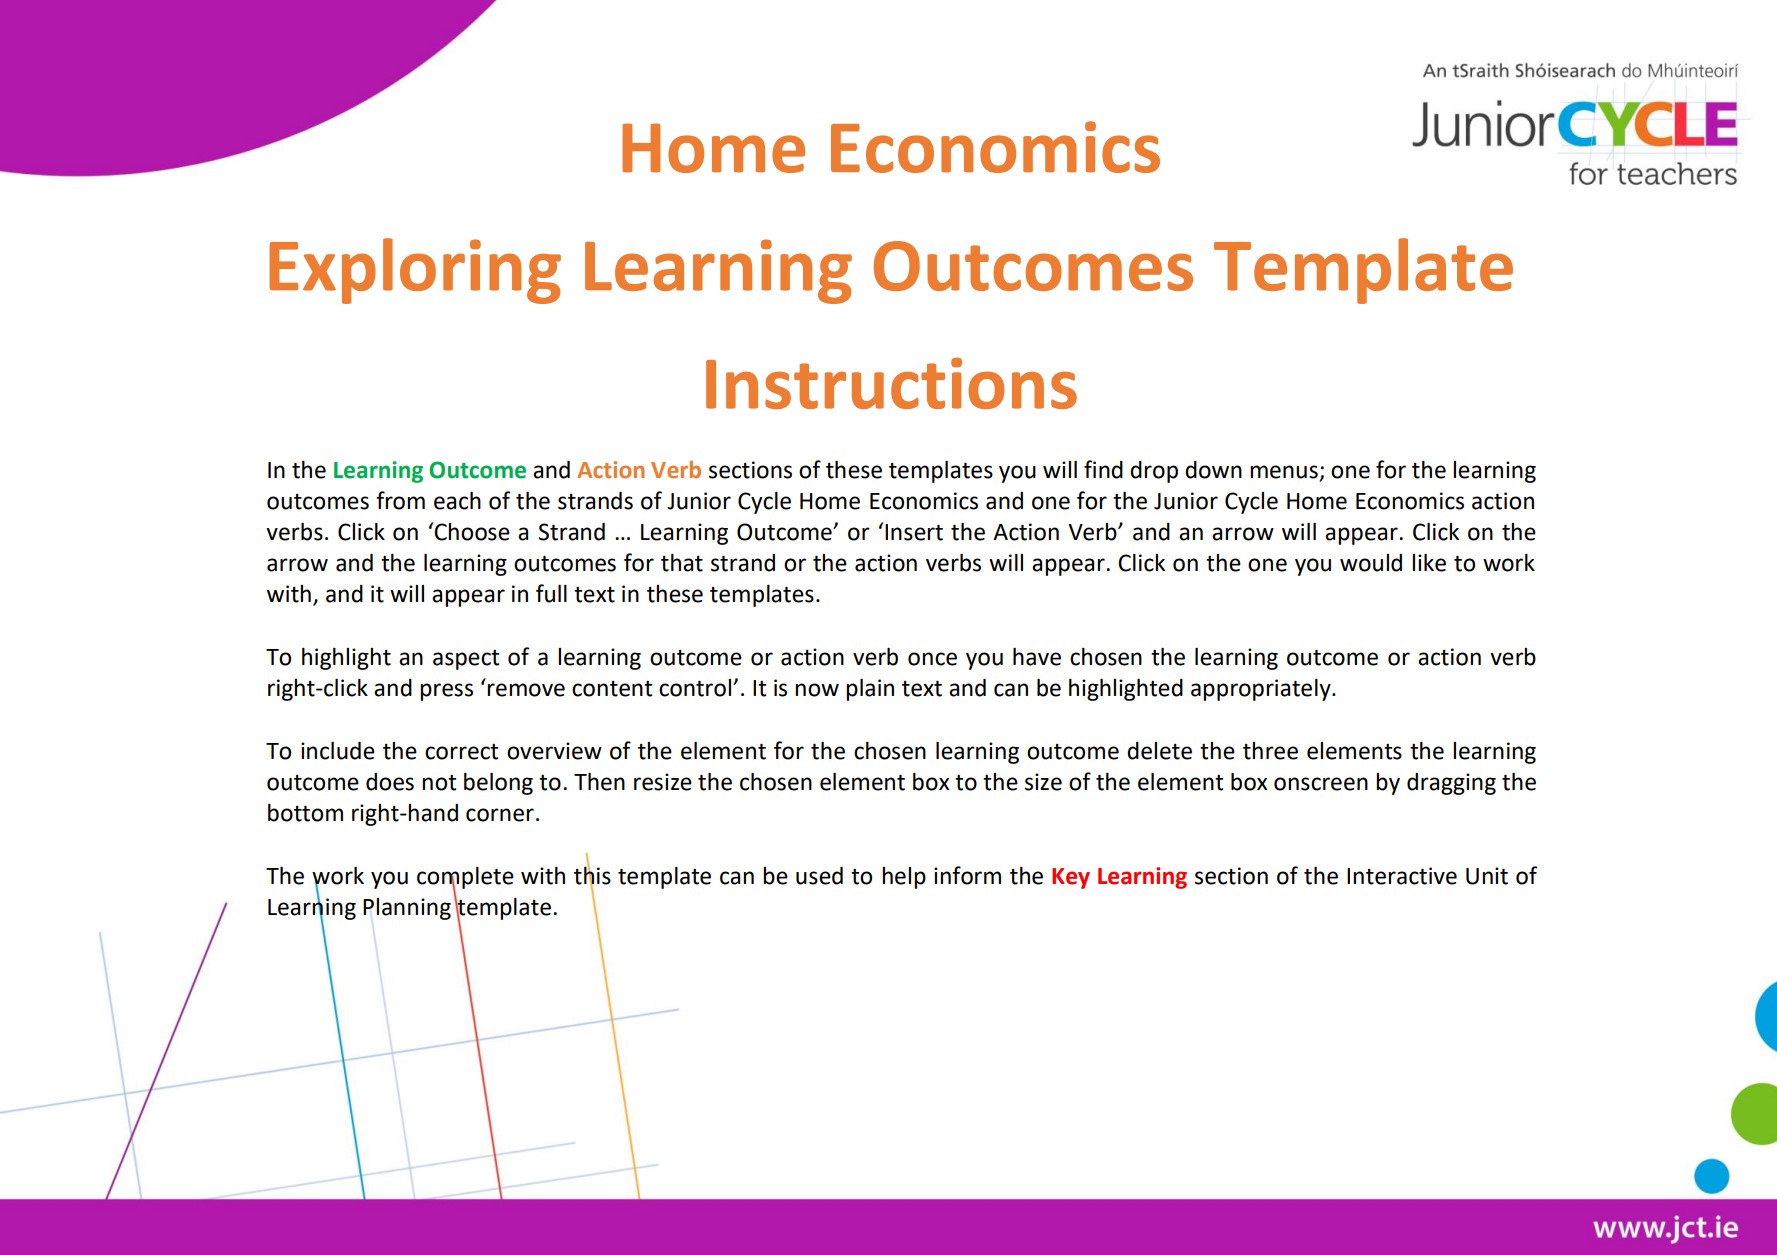 Home Economics Exploring Learning Outcomes Template Instructions